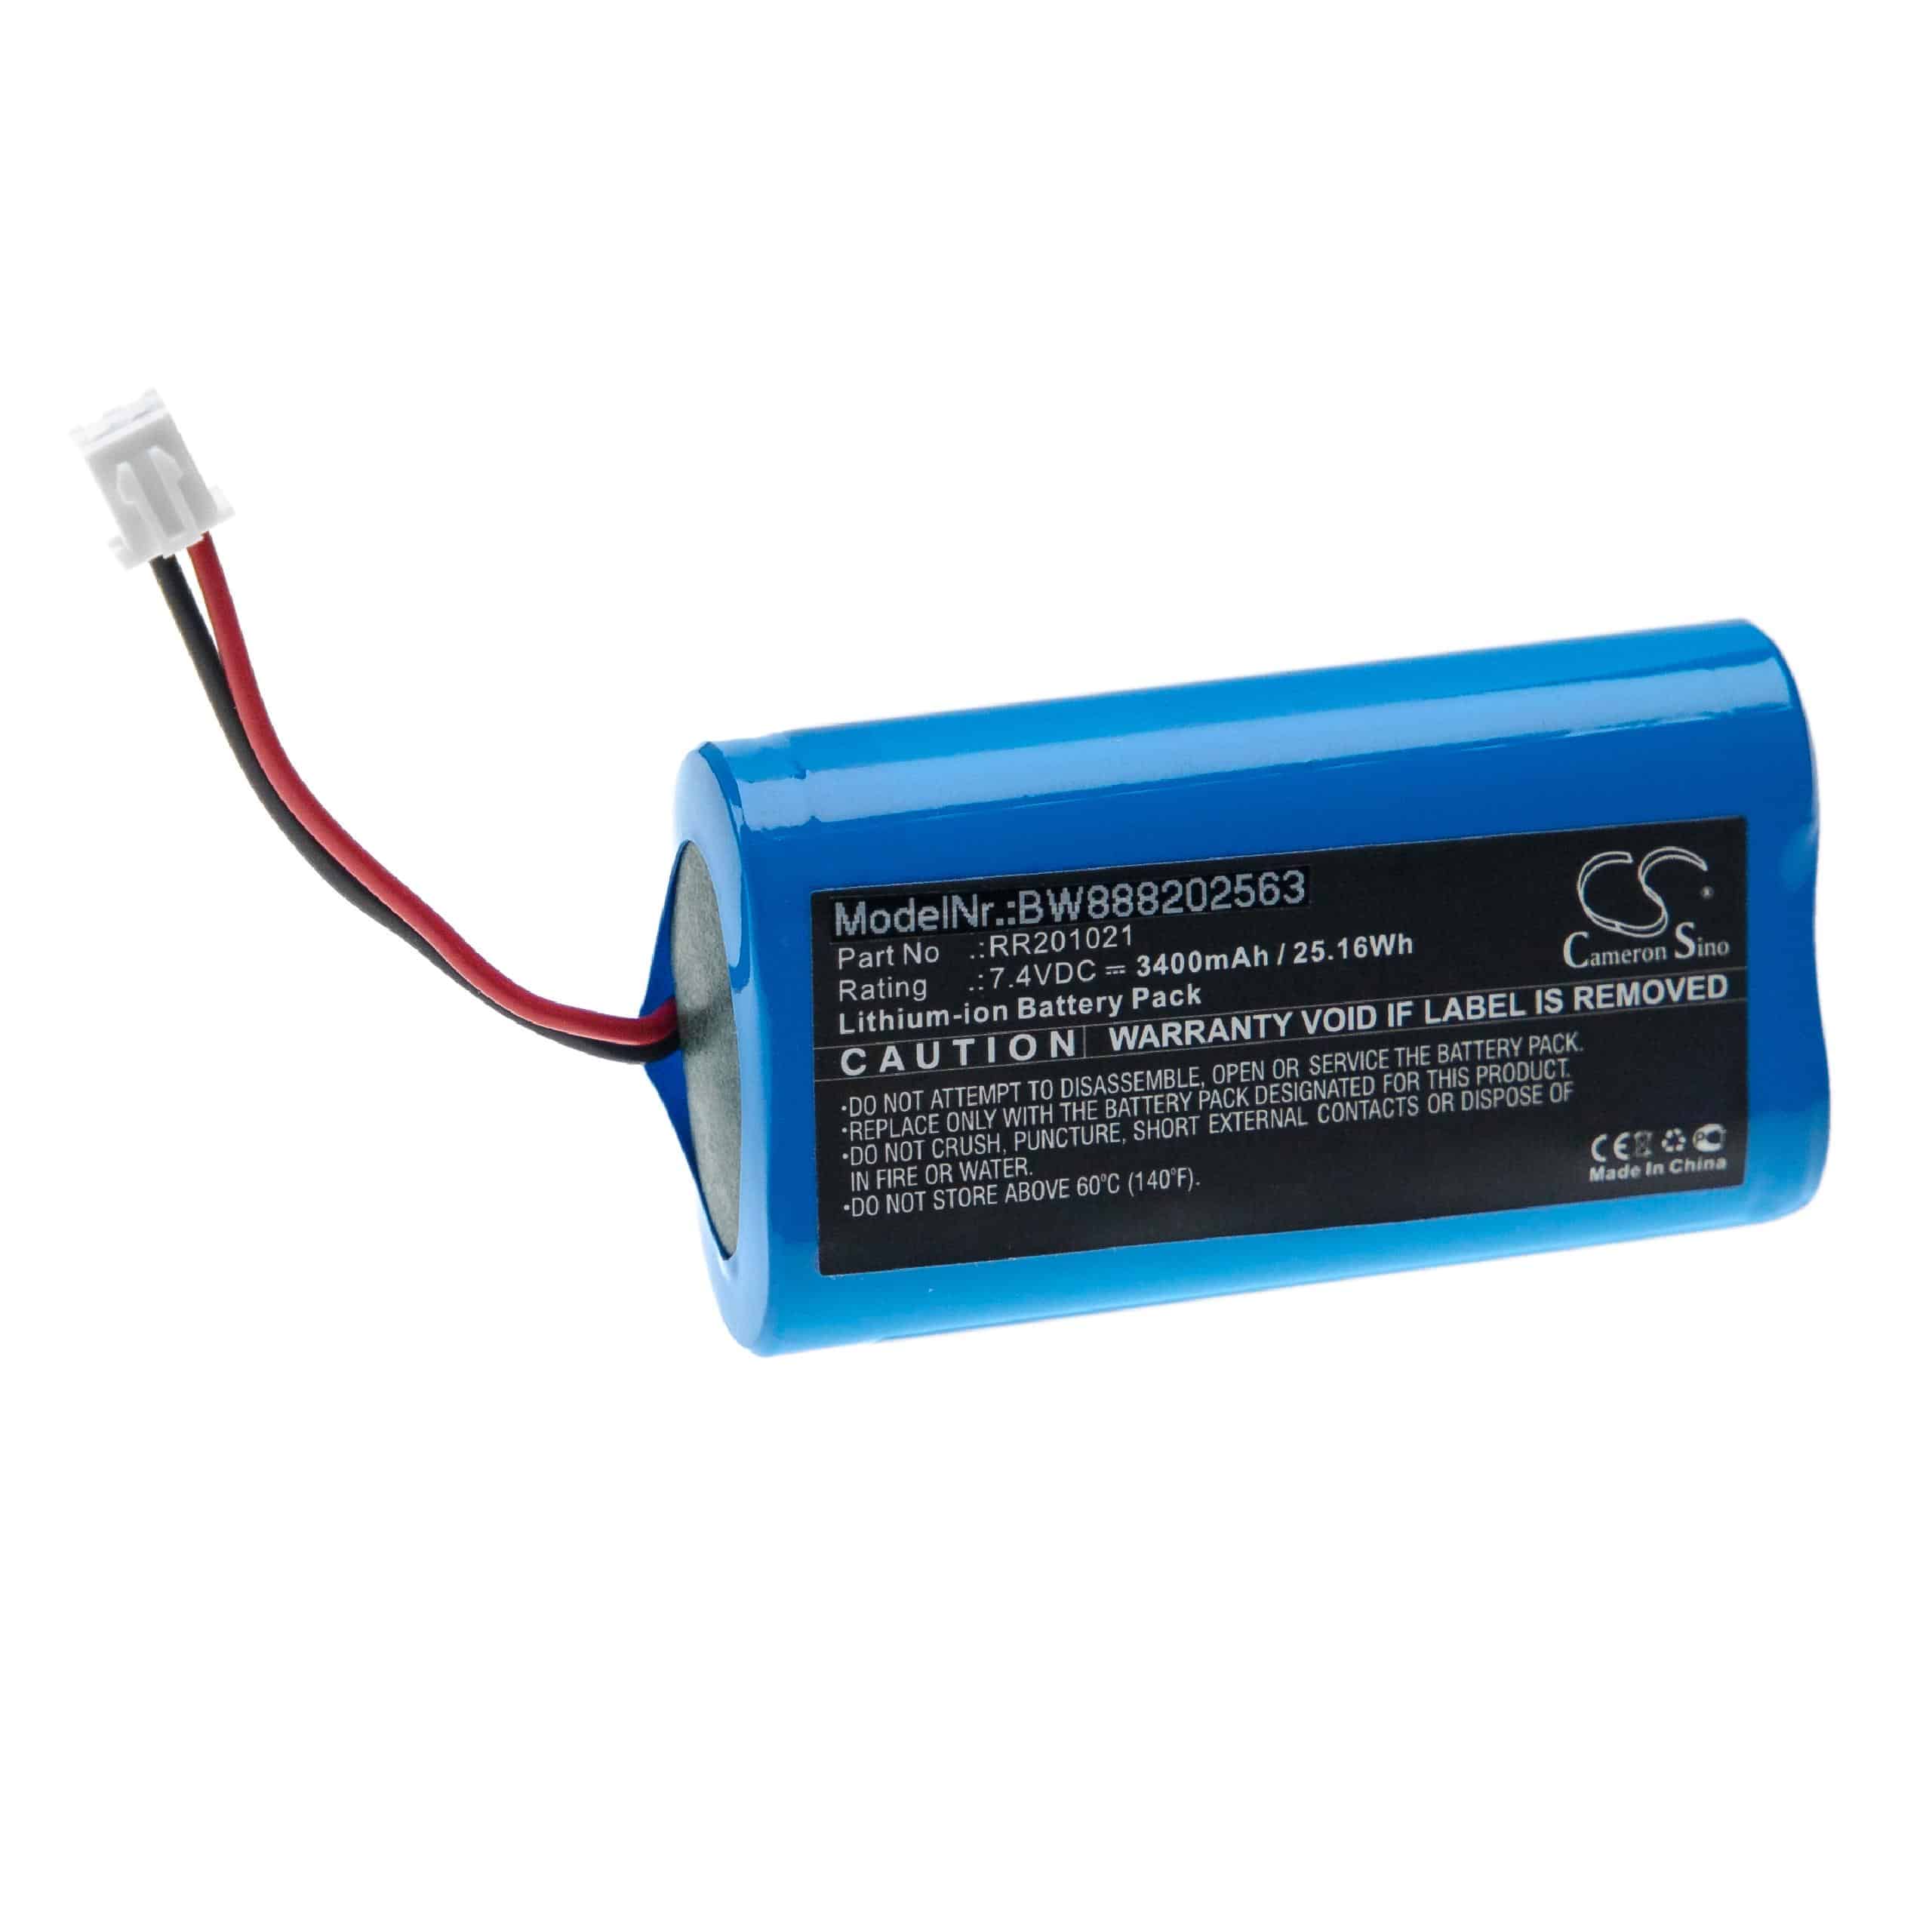 Fusion Splicer Battery Replacement for RR201021 - 3400mAh 7.4V Li-Ion